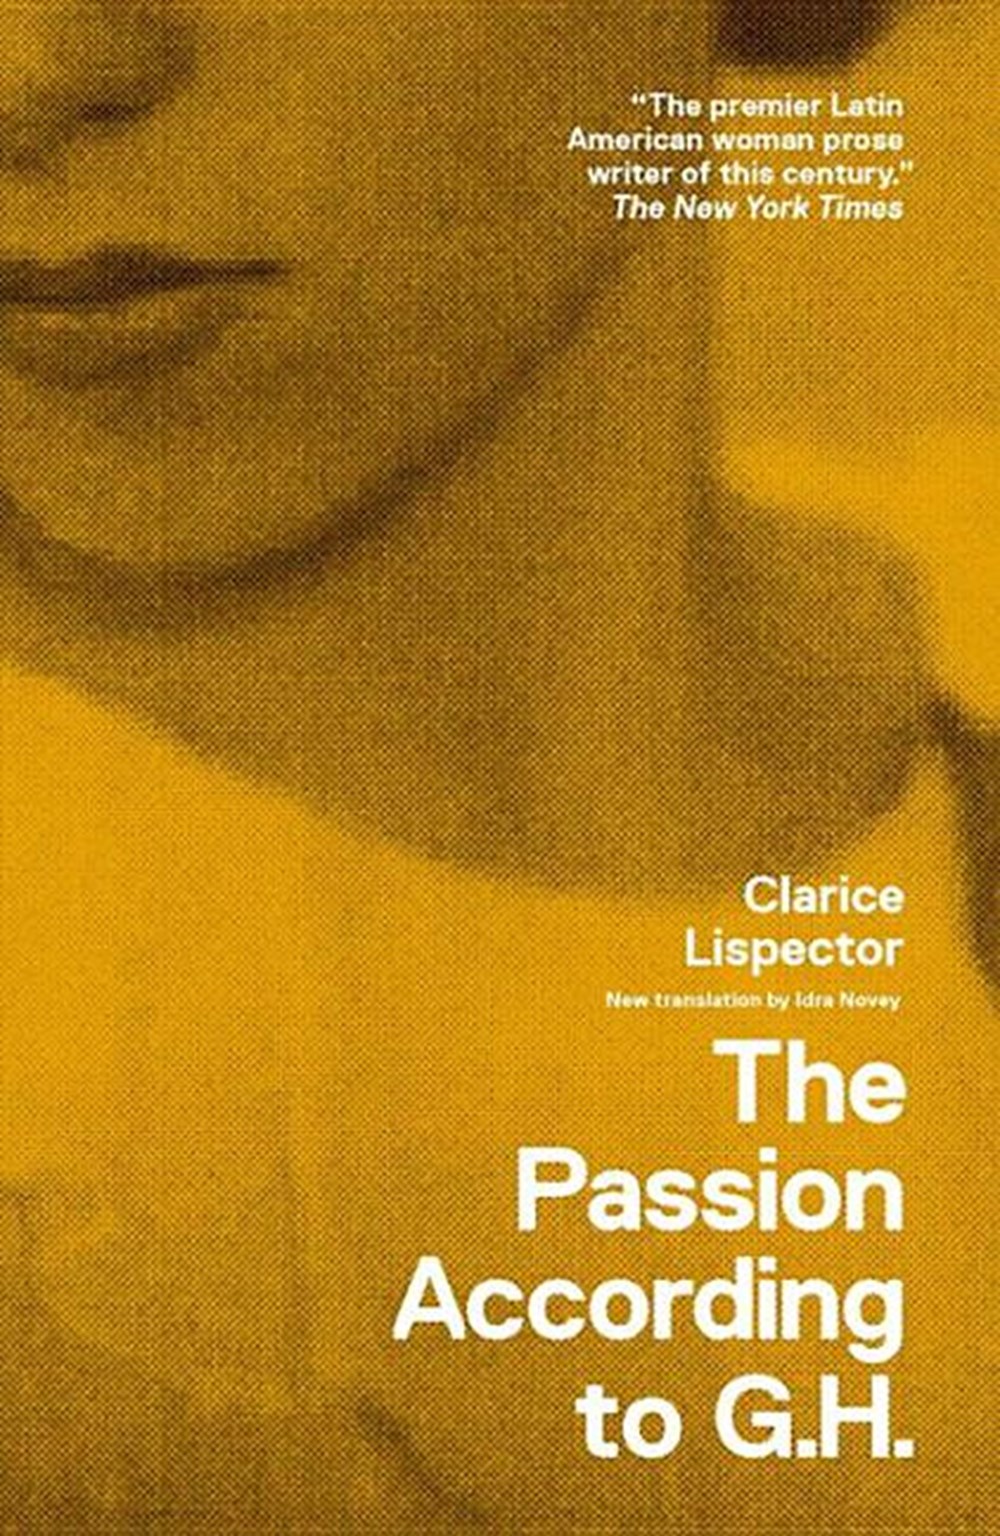 Passion According to G.H.